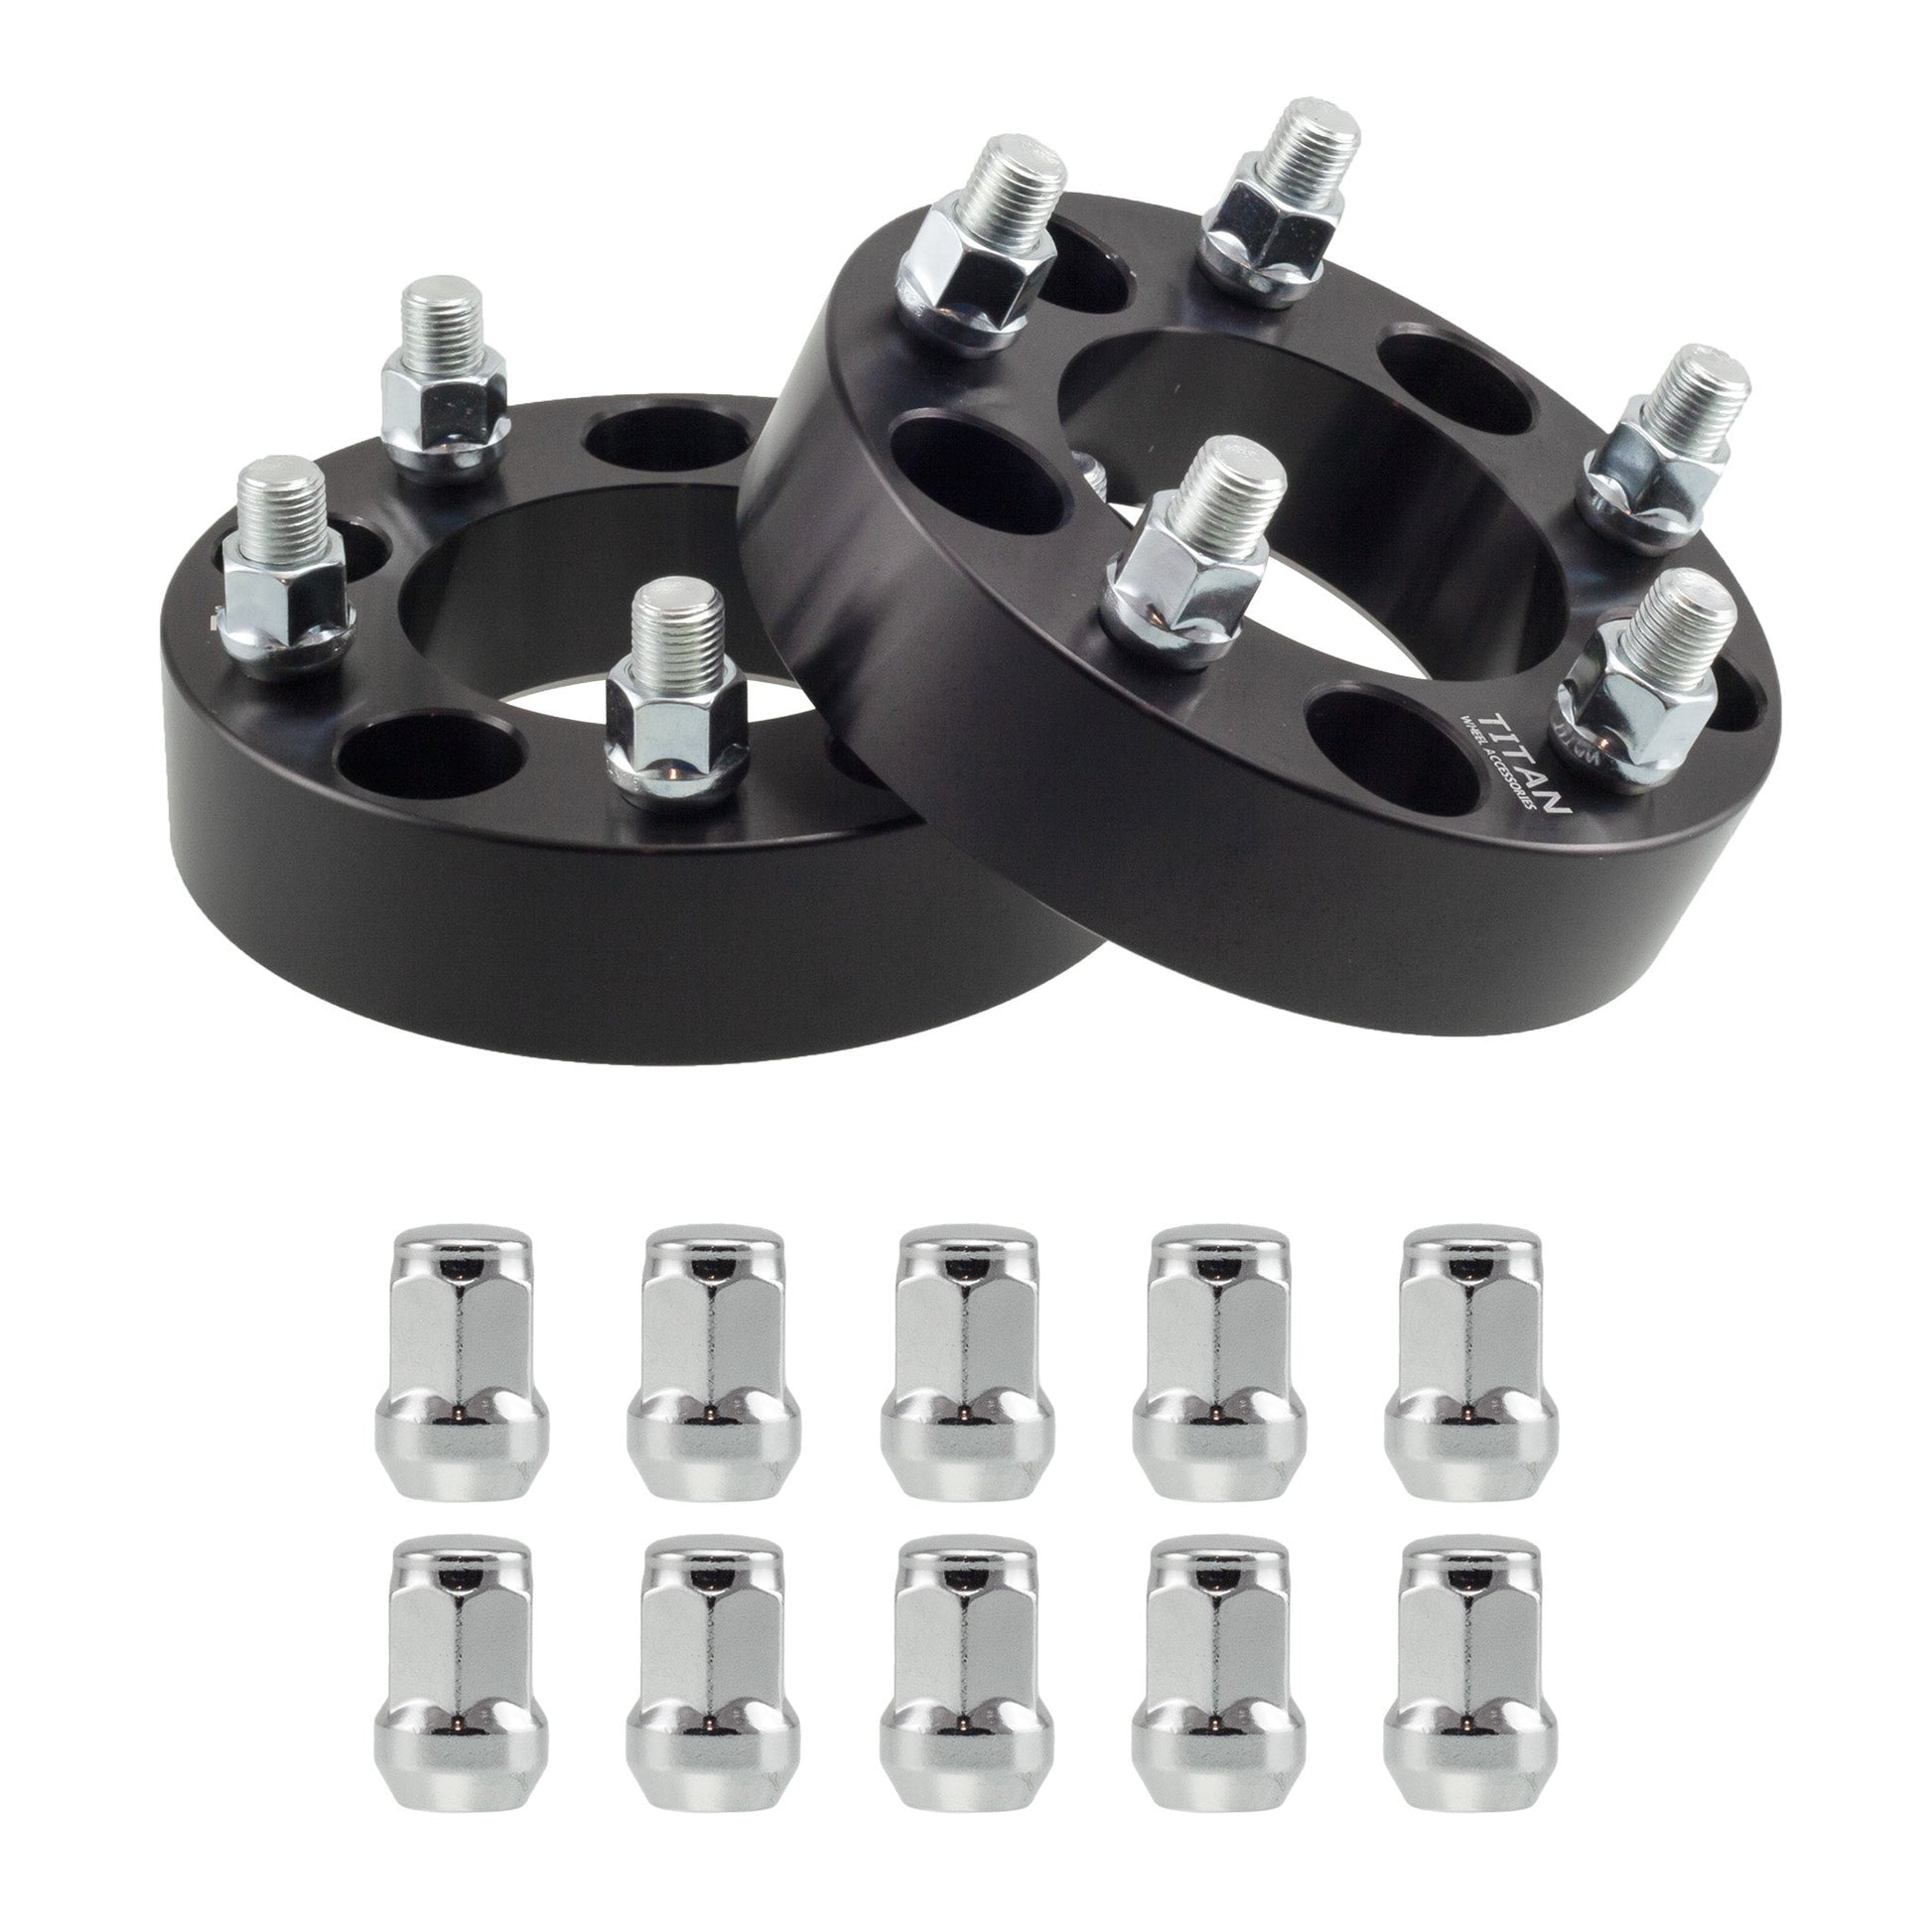 1" (25mm) Titan Wheel Spacers for Jeep Cherokee Renegade | 5x110 | 65.1 Hubcentric |12x1.25 Studs | Titan Wheel Accessories